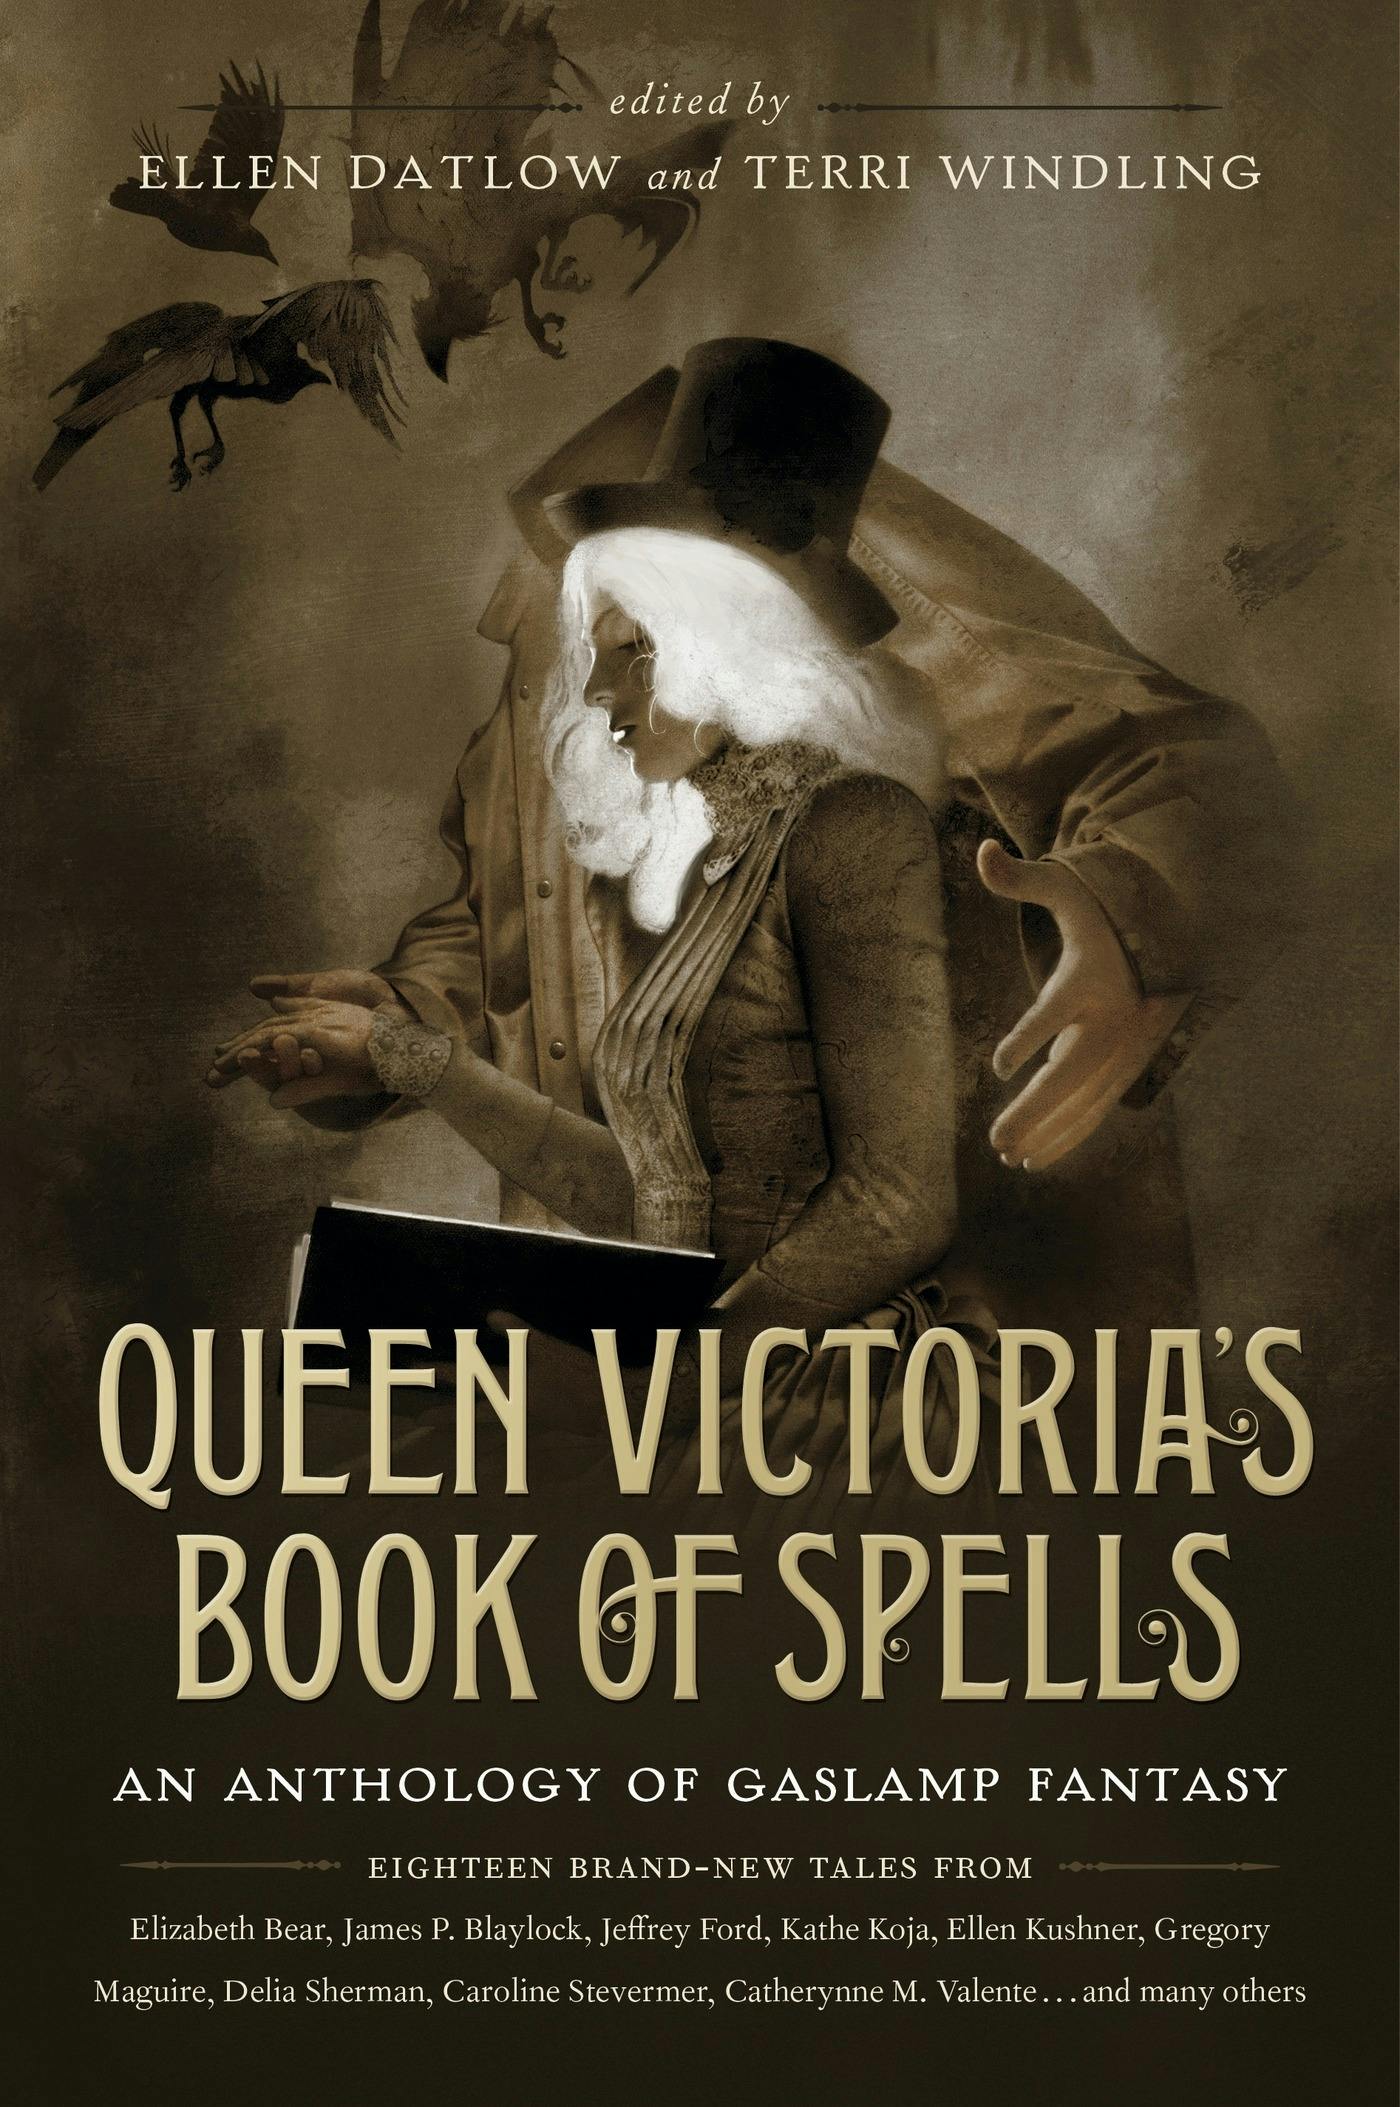 Cover for the book titled as: Queen Victoria's Book of Spells